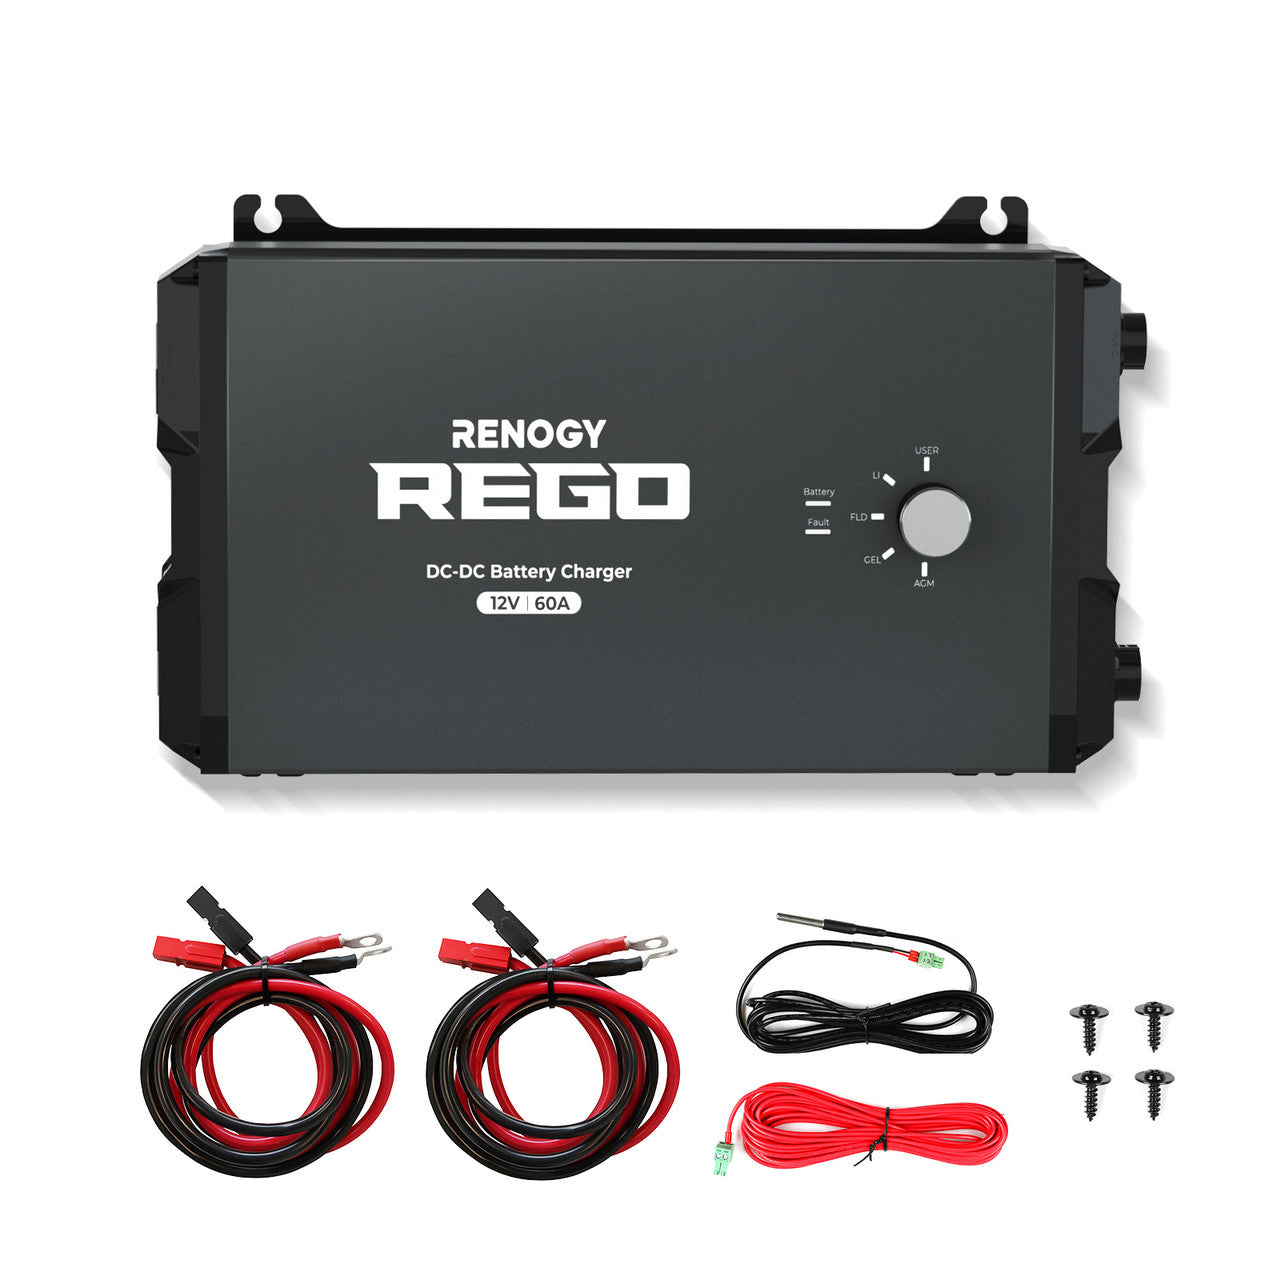 Renogy REGO 12V 60A DC-DC Battery Charger (10FT 6AWG Cable